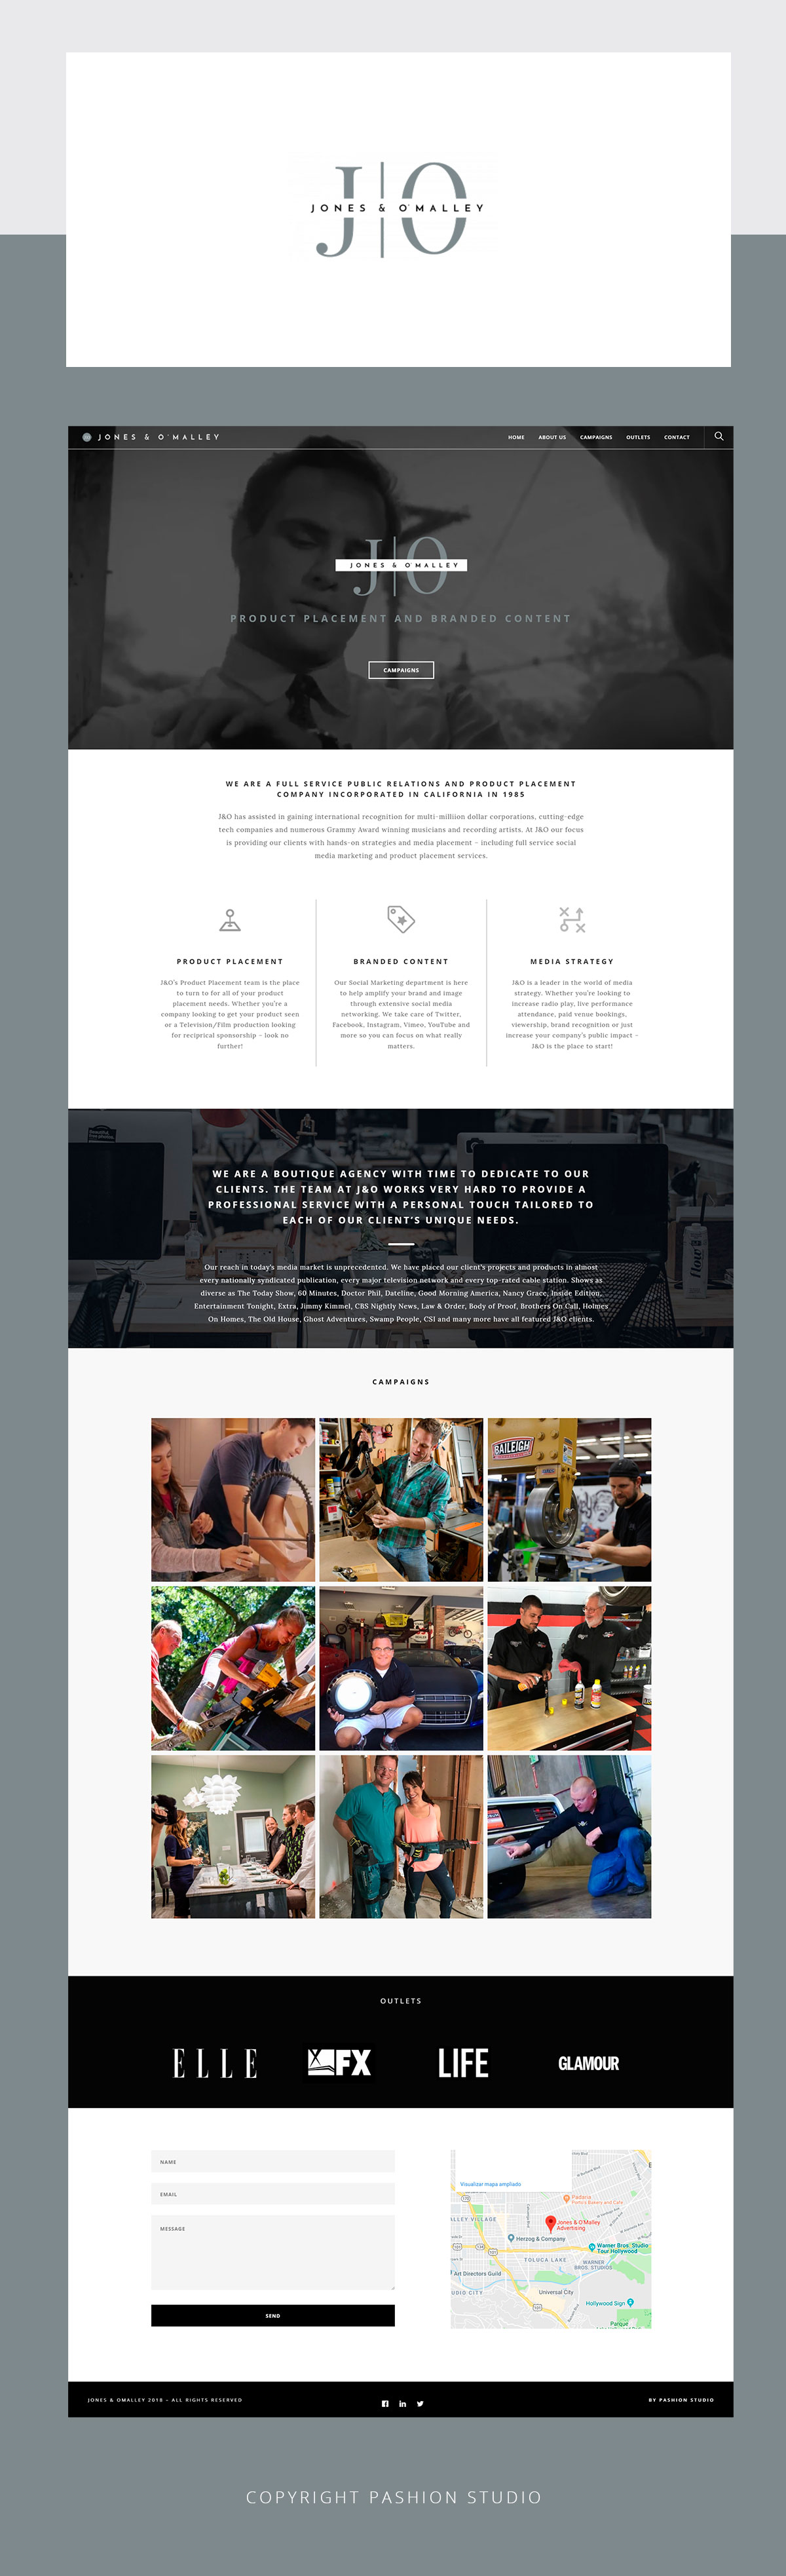 Web design development for Los Angeles PR and product placement studio